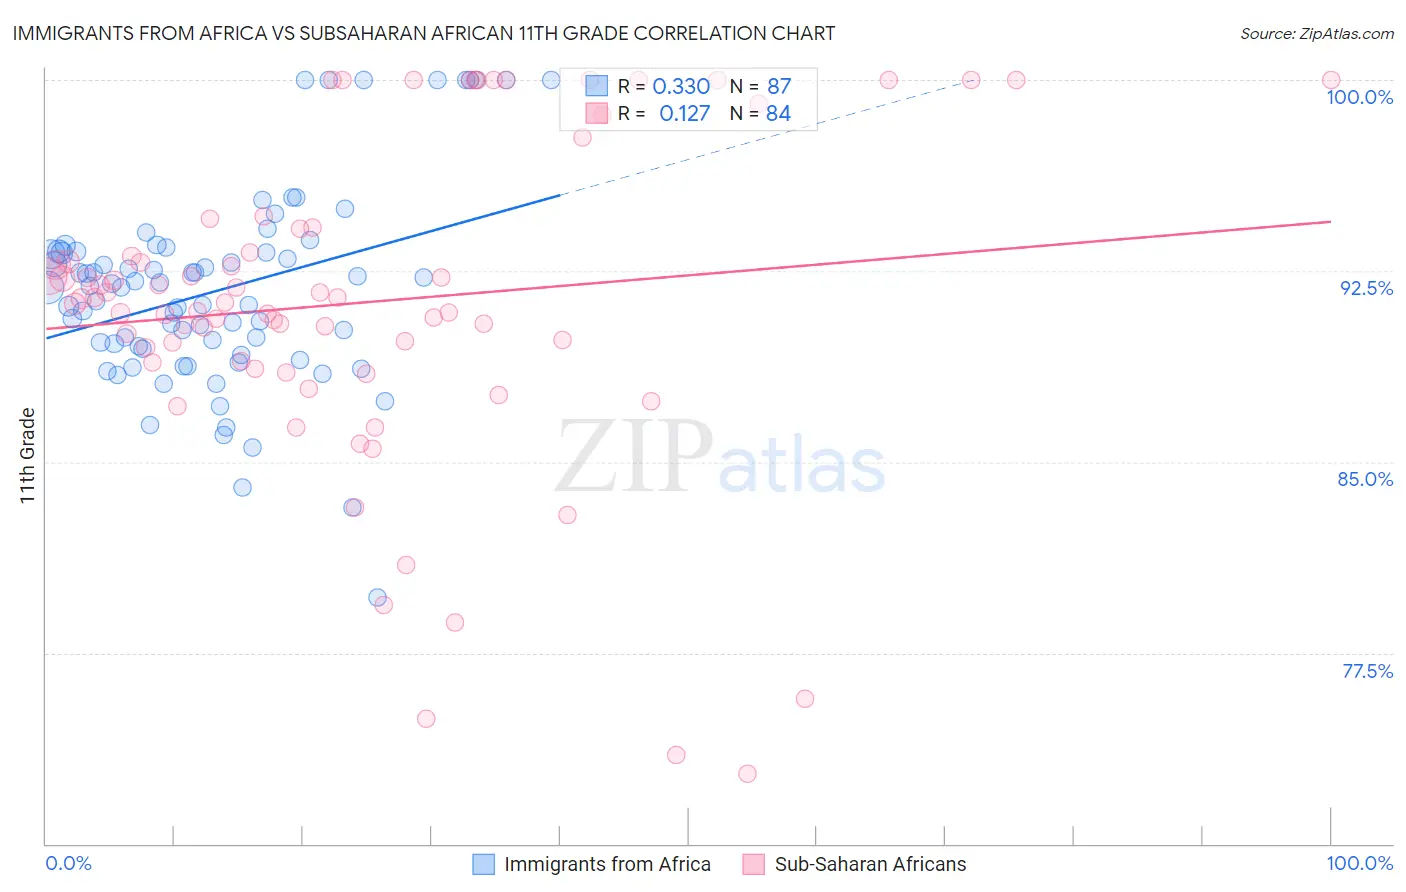 Immigrants from Africa vs Subsaharan African 11th Grade